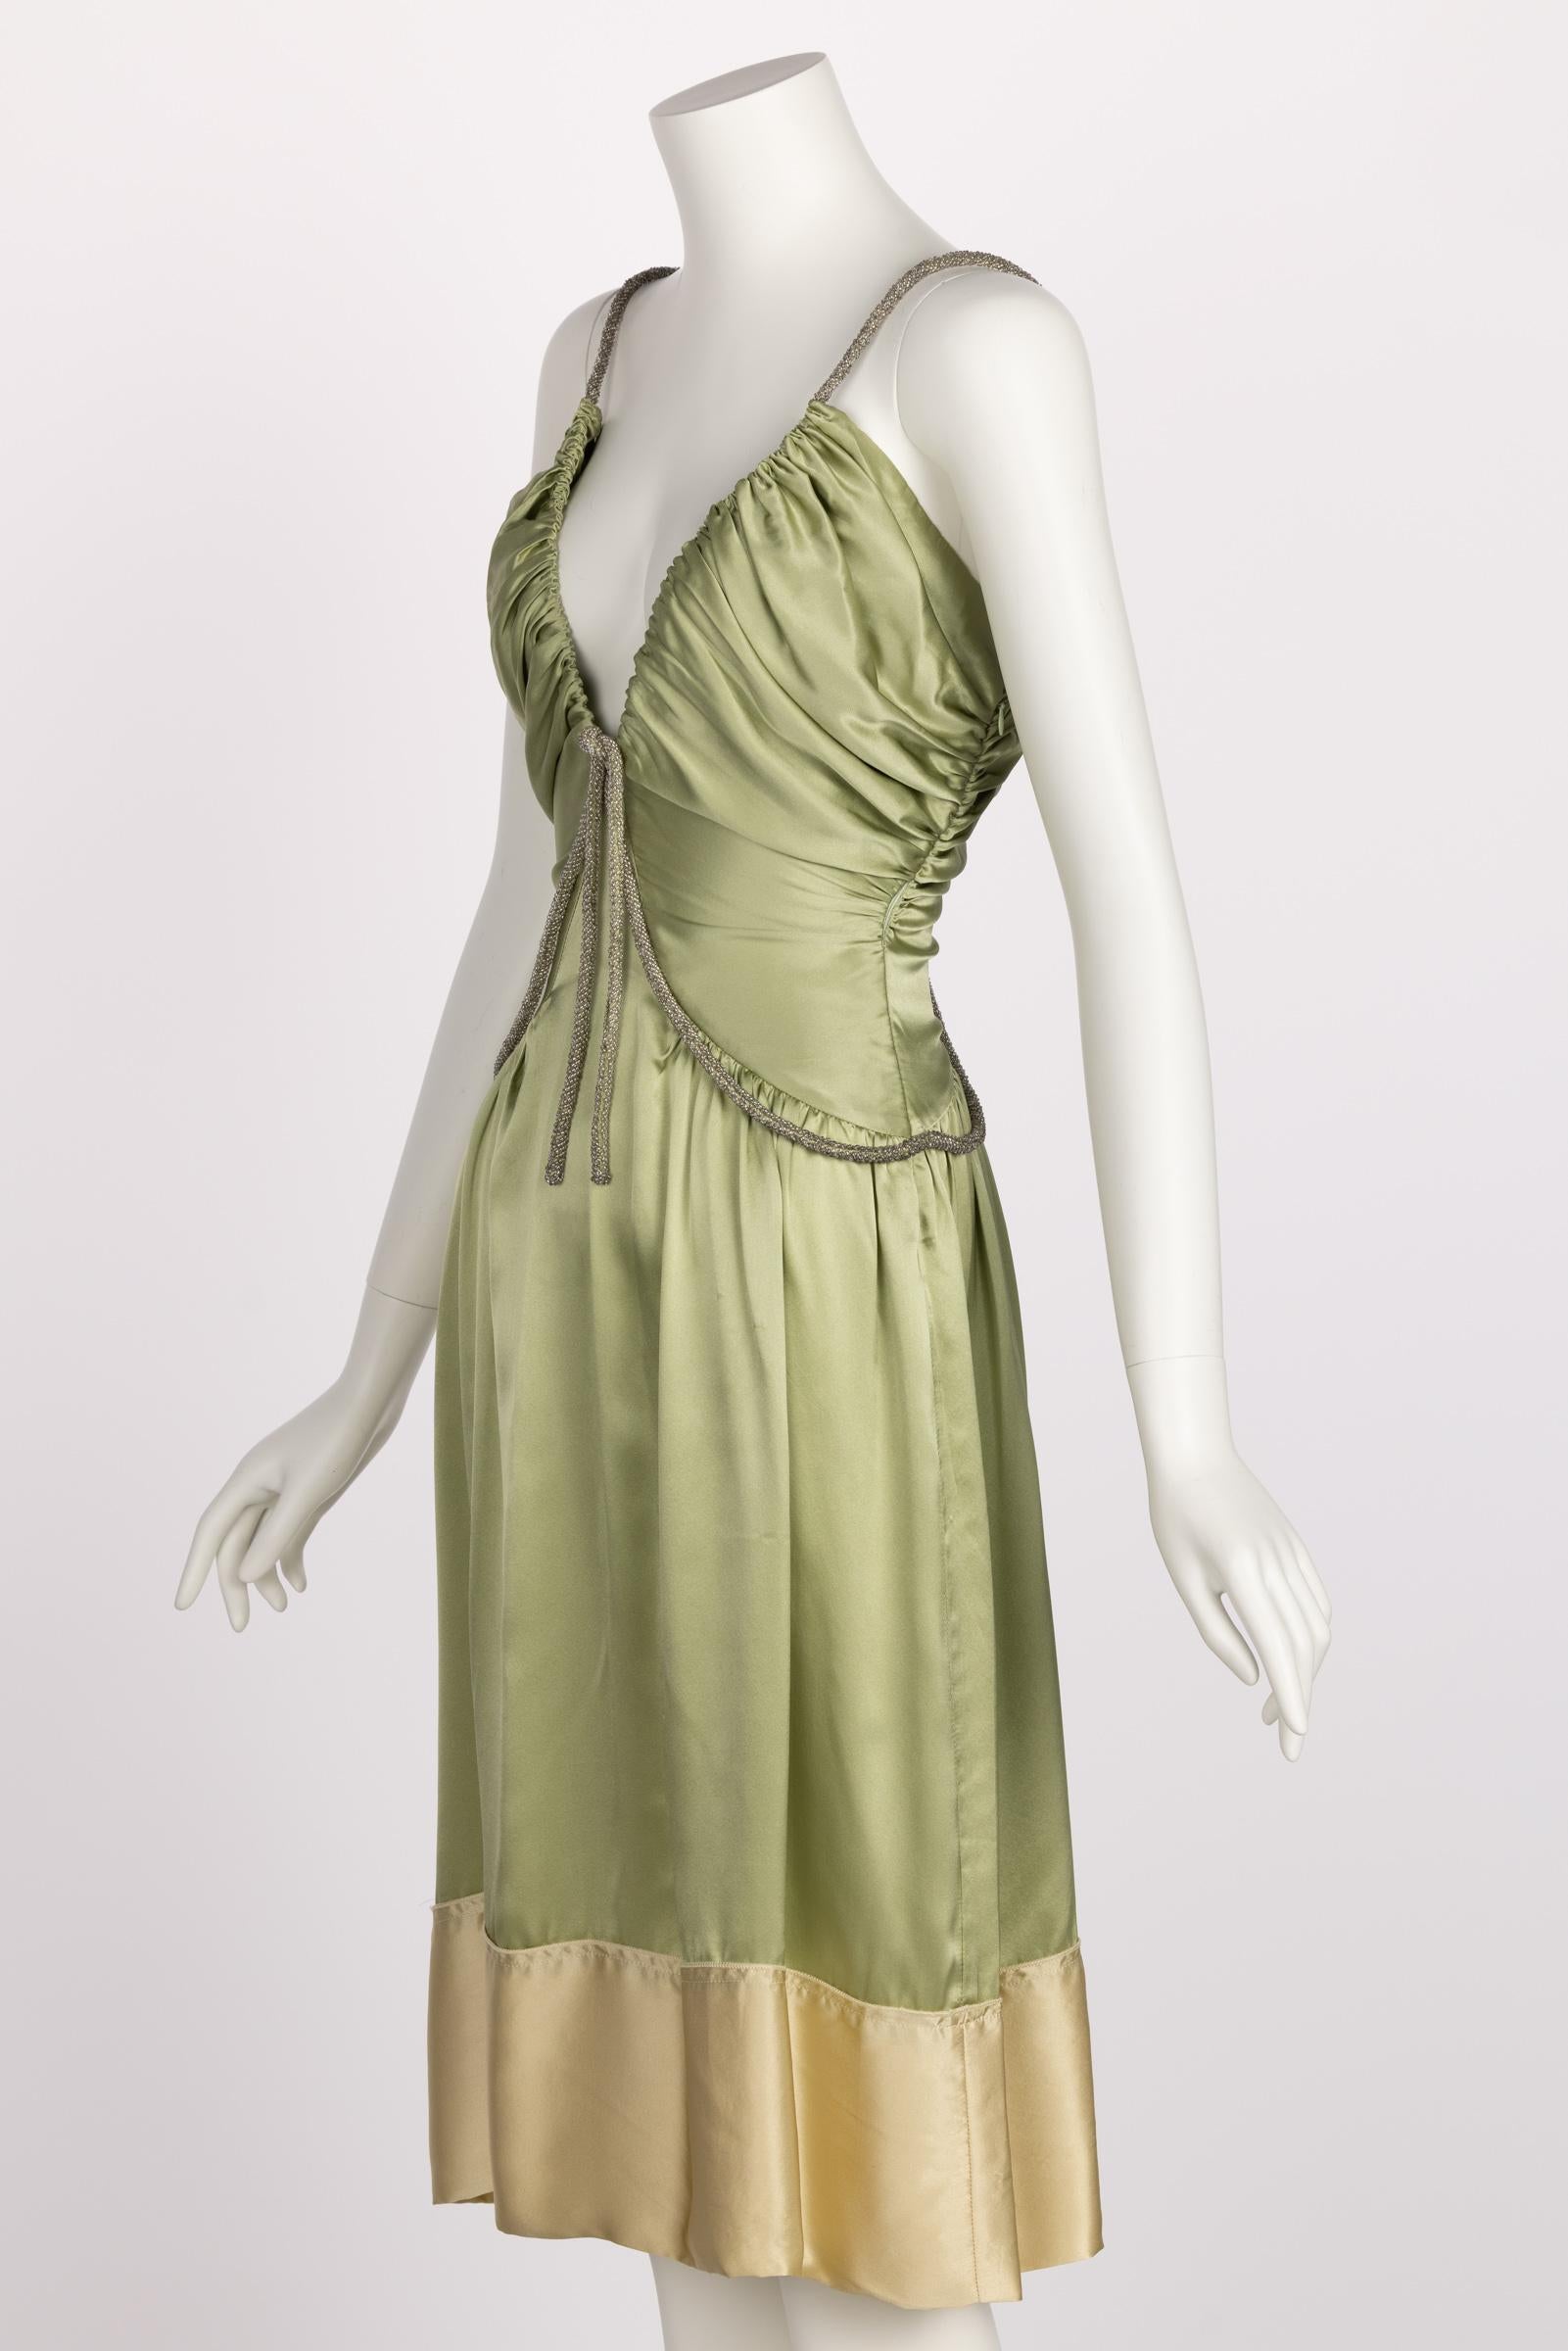 Chloé Phoebe Philo Beaded Straps Plunge Silk Dress Runway Spring 2005  In Good Condition In Boca Raton, FL